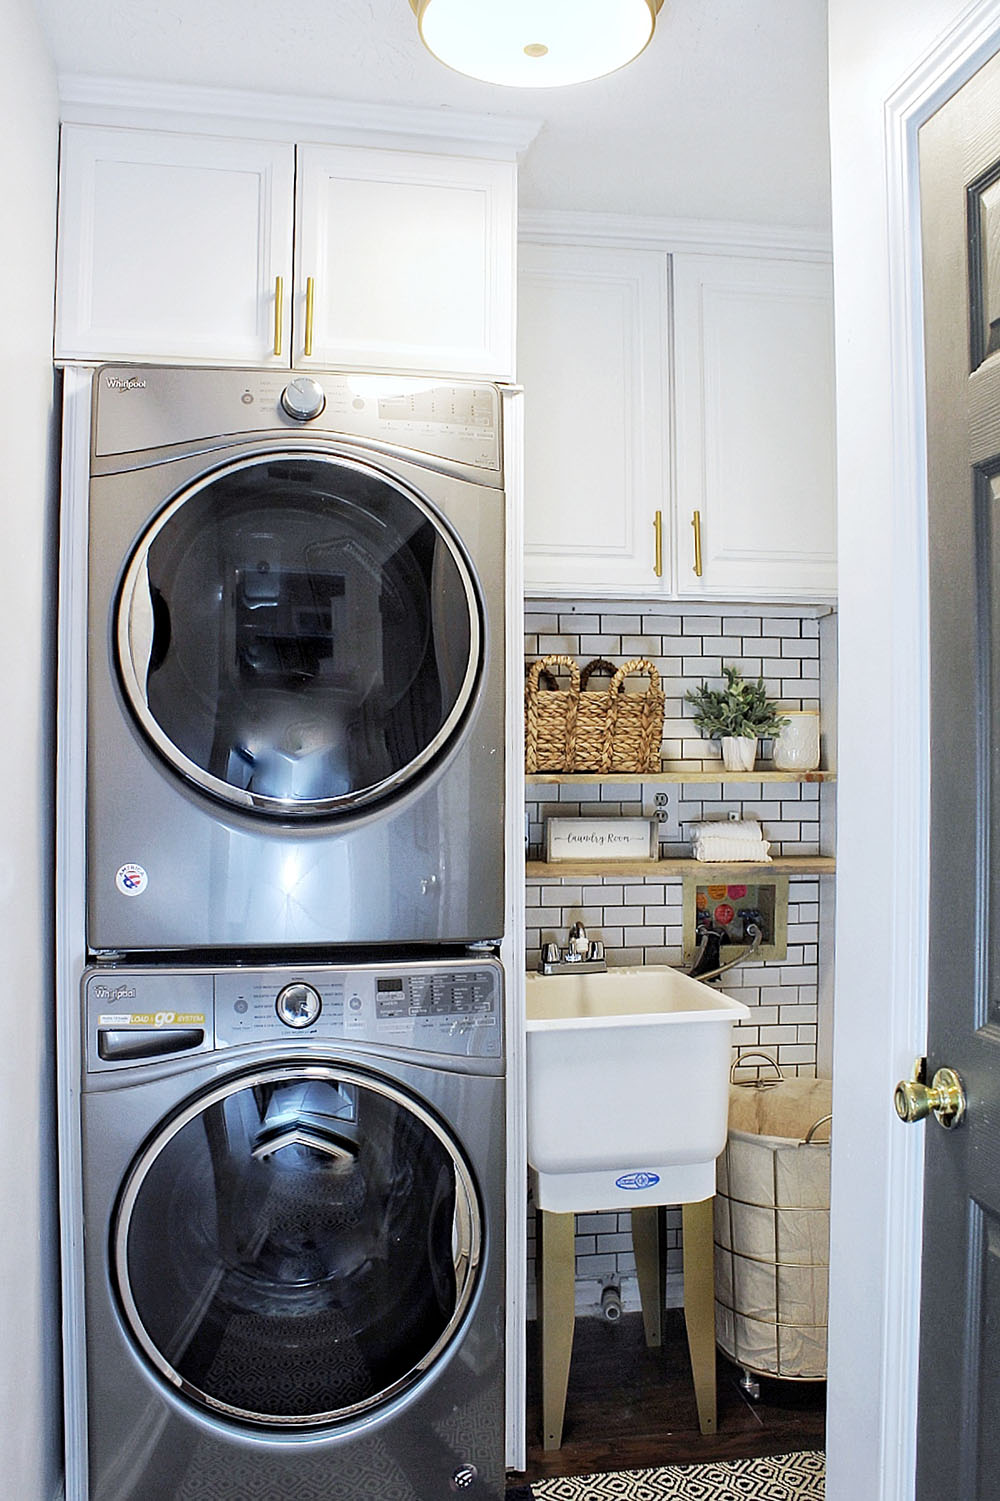 A completed small laundry room update with new appliances, cabinets, and shelving.